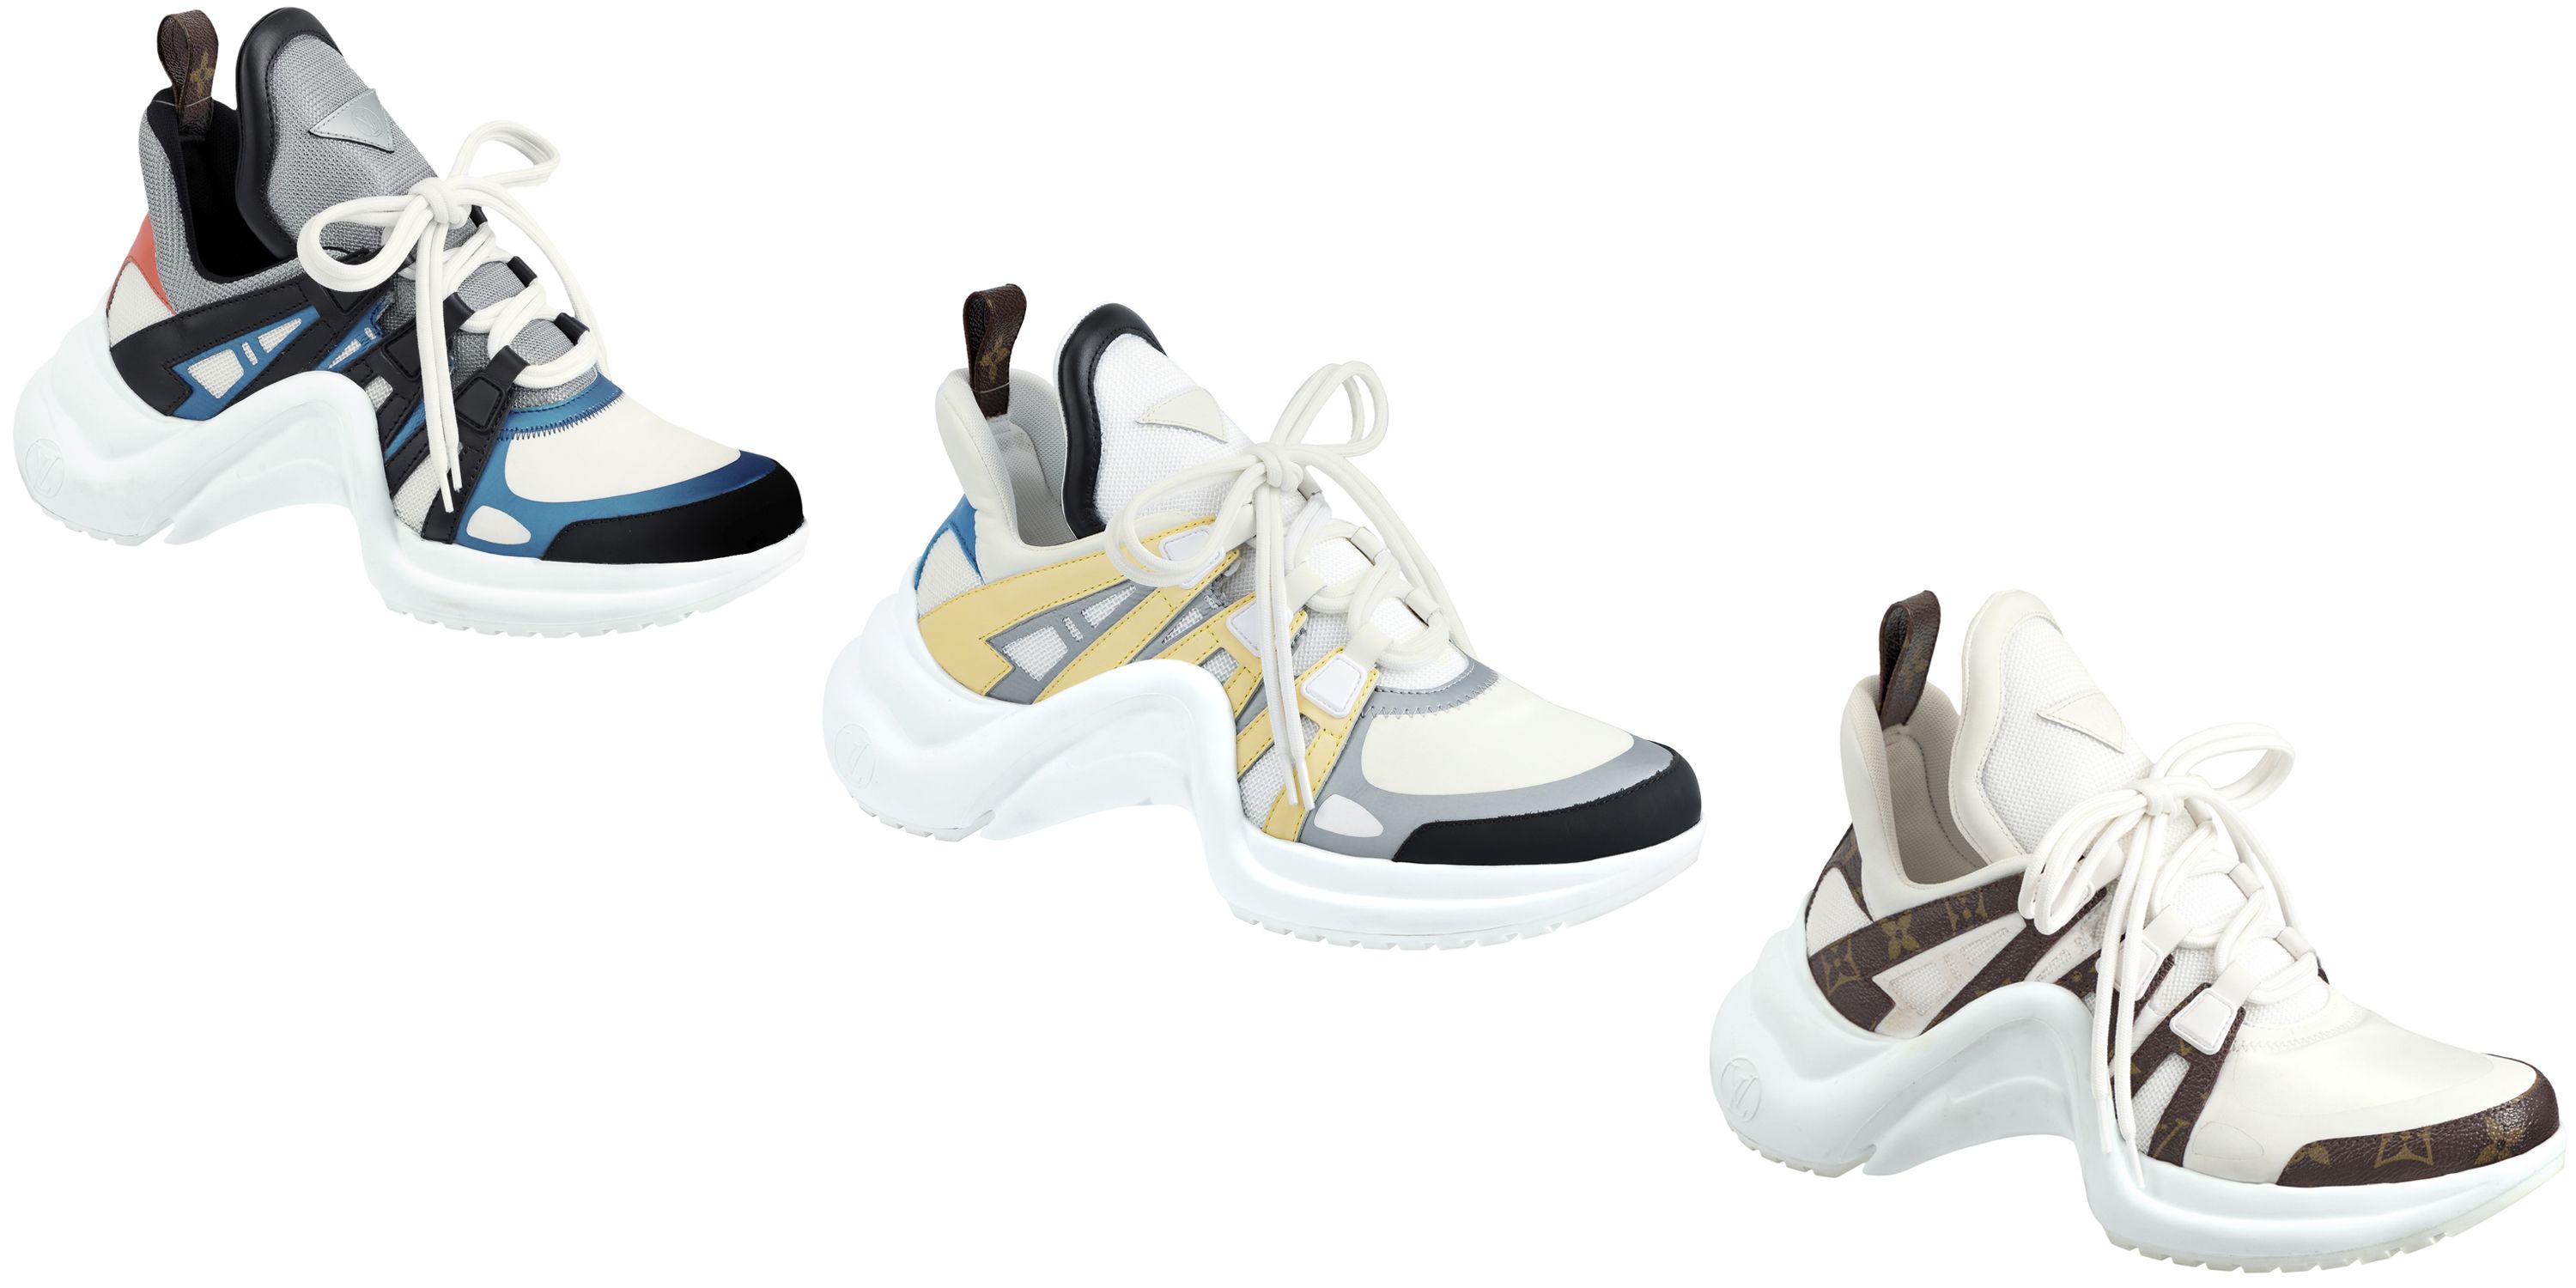 Louis Vuitton Just Opened a Sneaker Pop-Up Store in NYC - Louis Vuitton's  New Ugly Sneakers